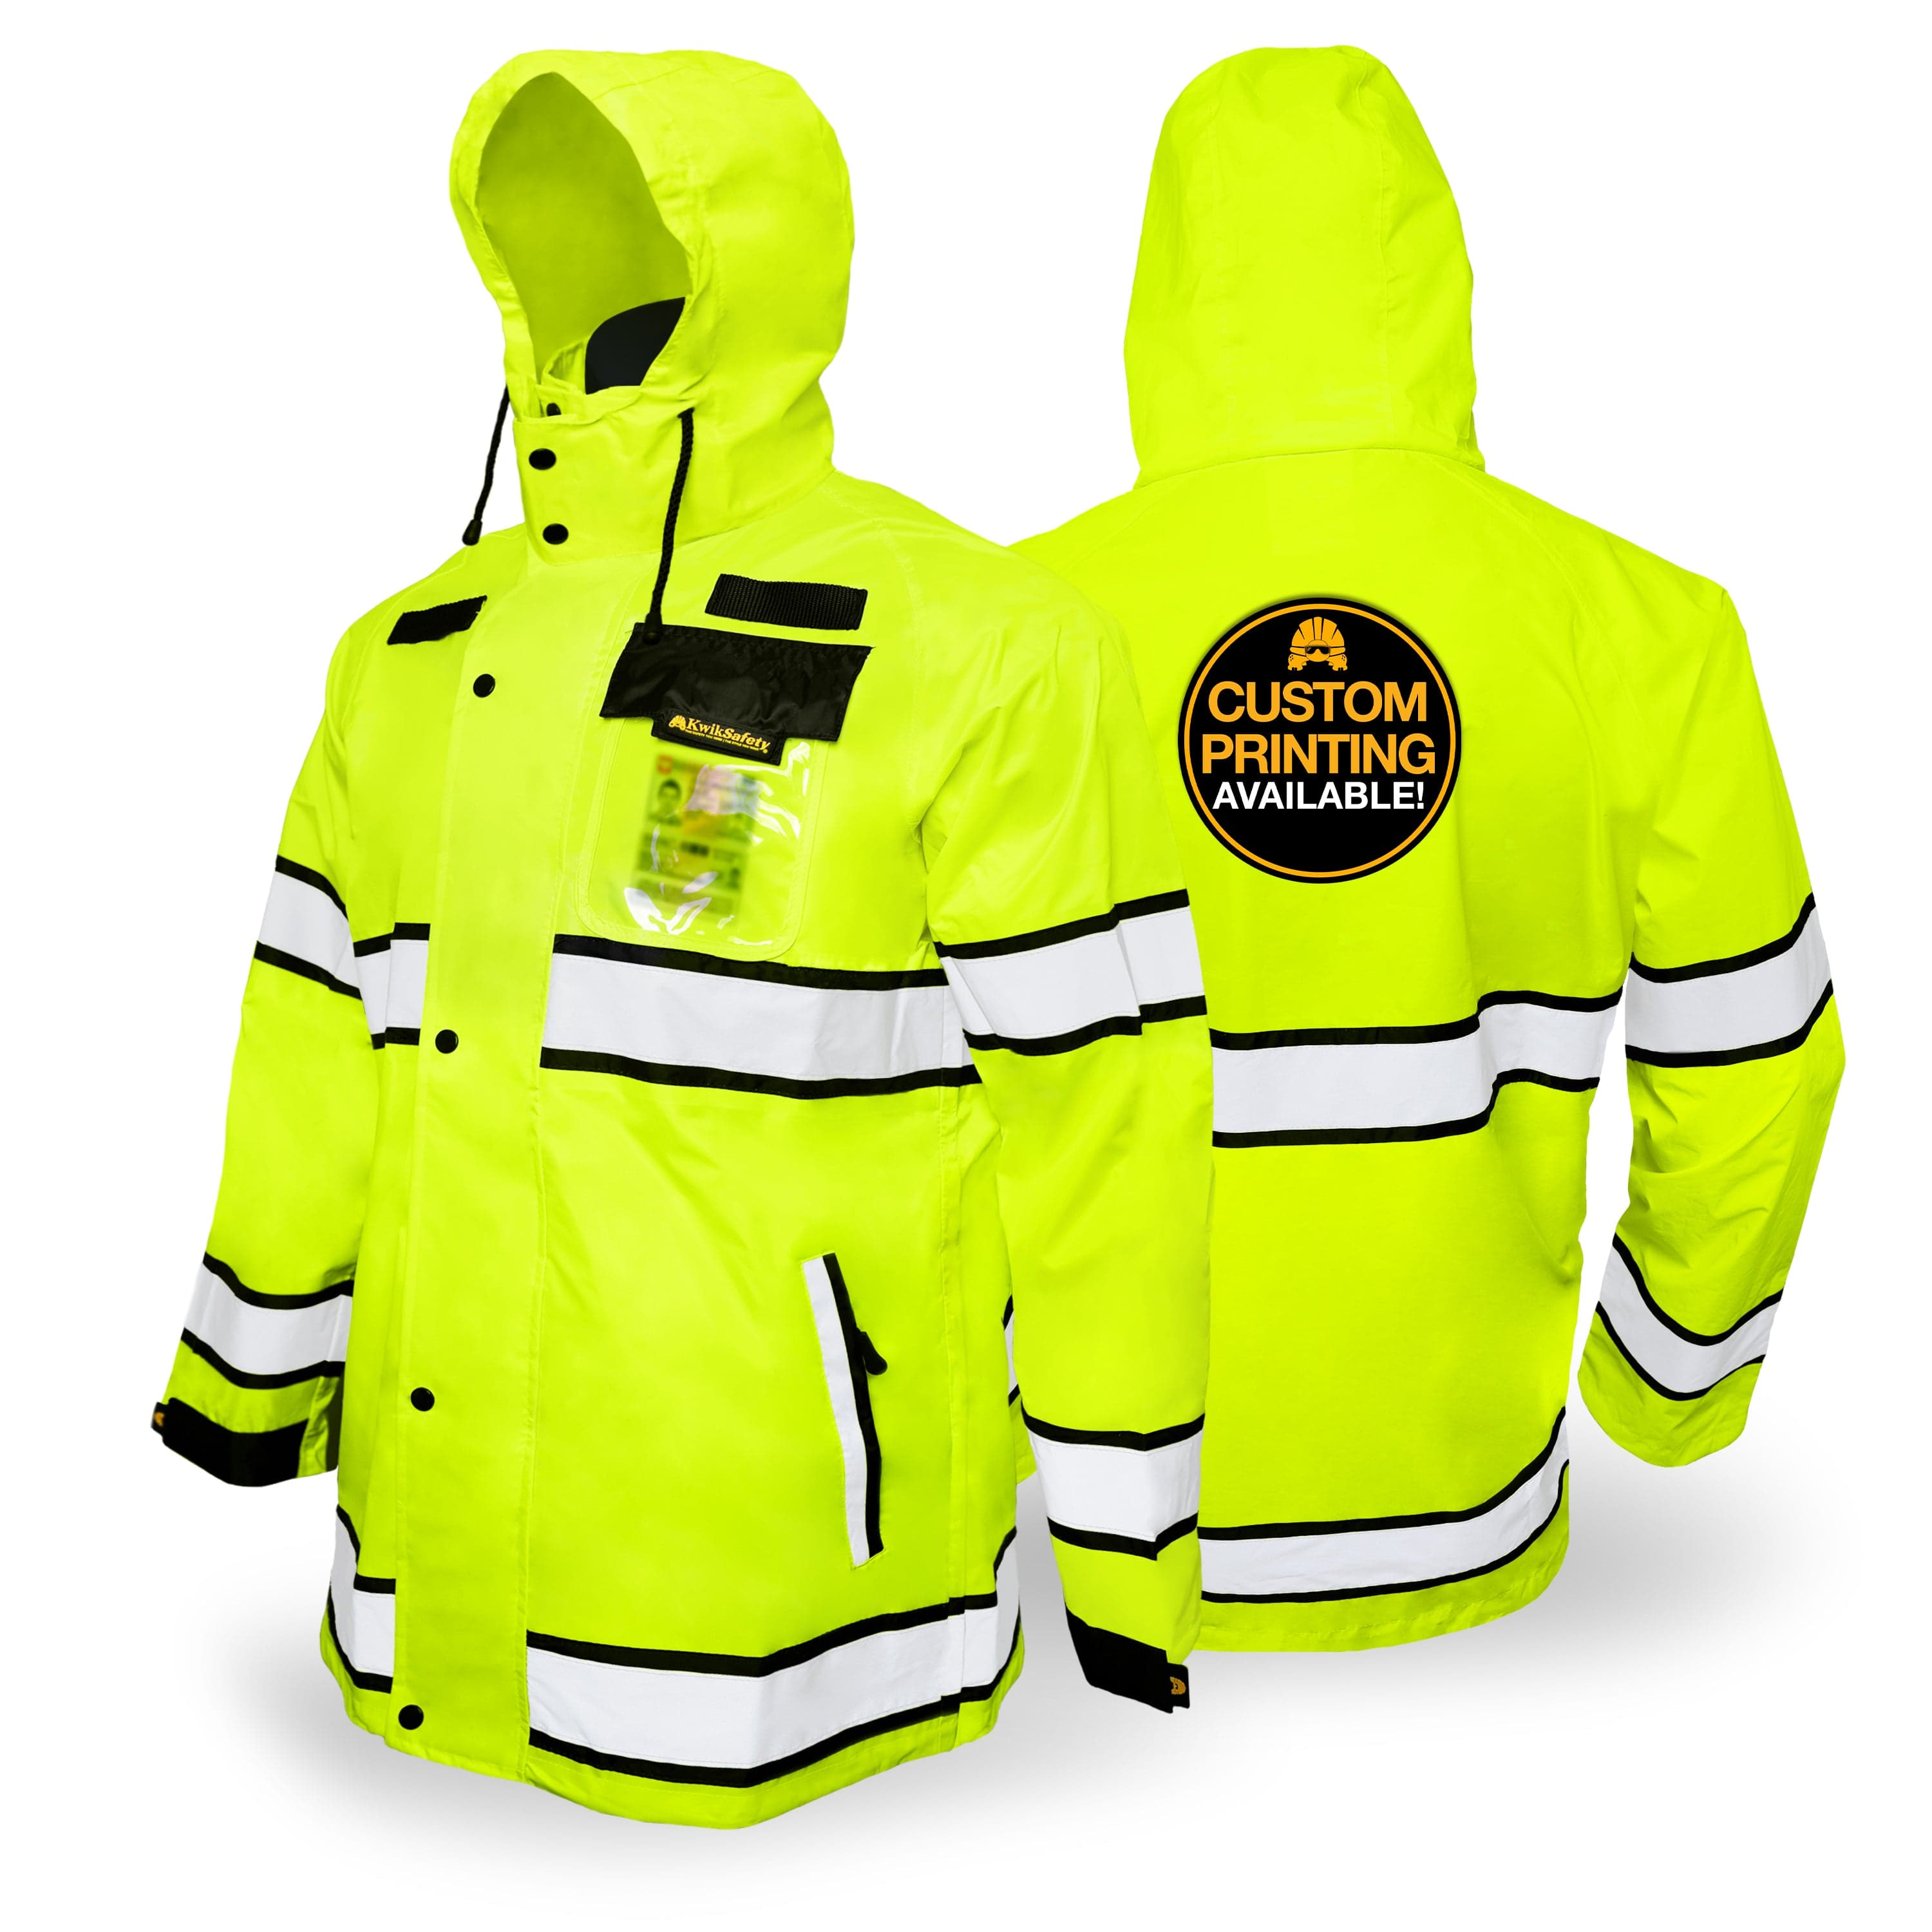 VENDACE High Visibility Reflective Safety Jackets for Men 2-in-1 ANSI Class  3 Hi Vis Winter Jacket Waterproof